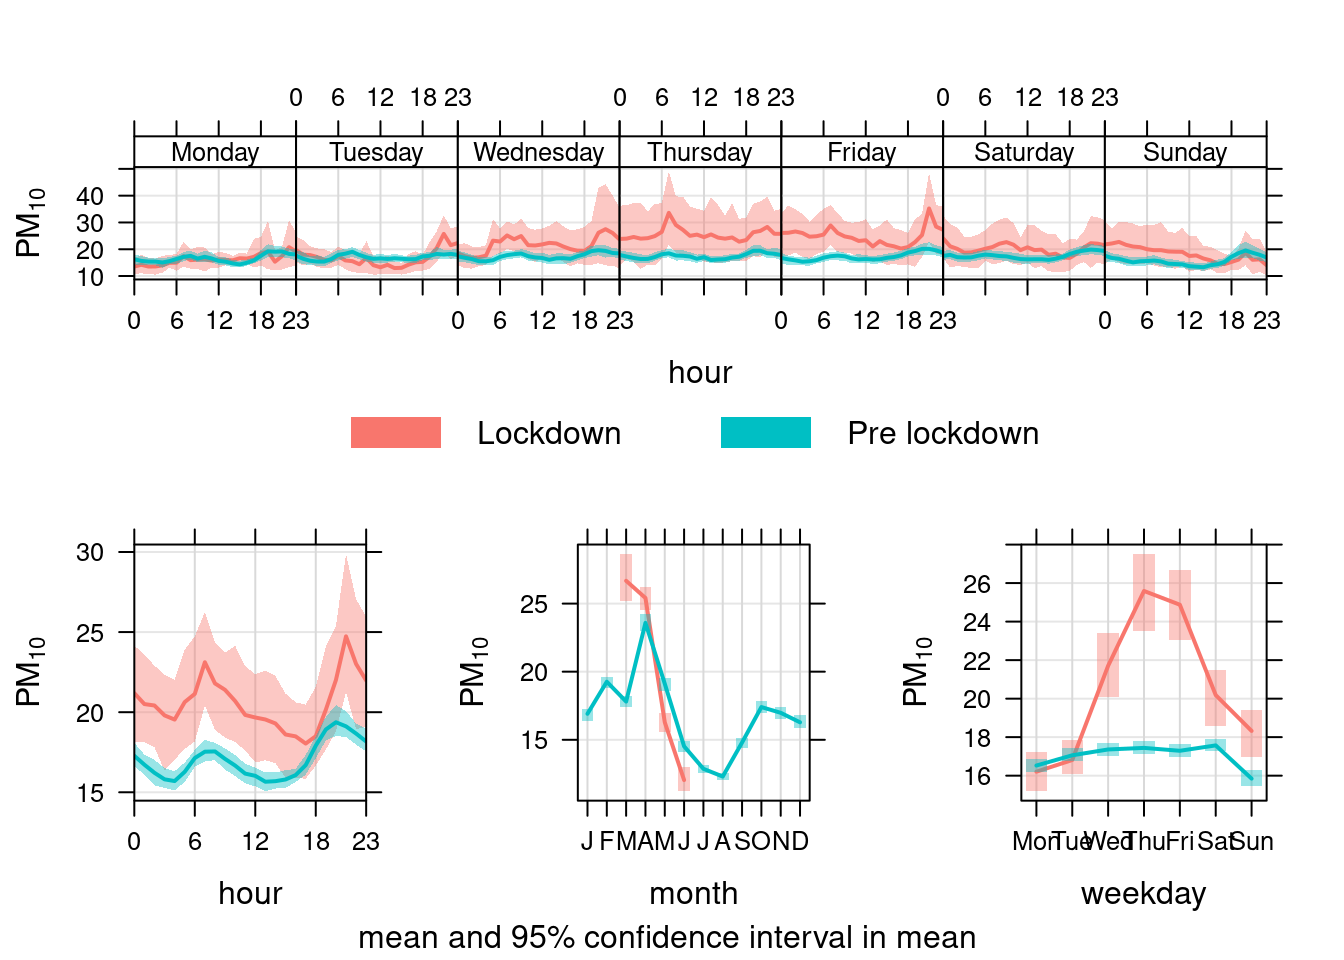 timeVariation plots for PM10 at Southampton Centre comparing lockdown 2020 with pre-lockdown starting in 2017